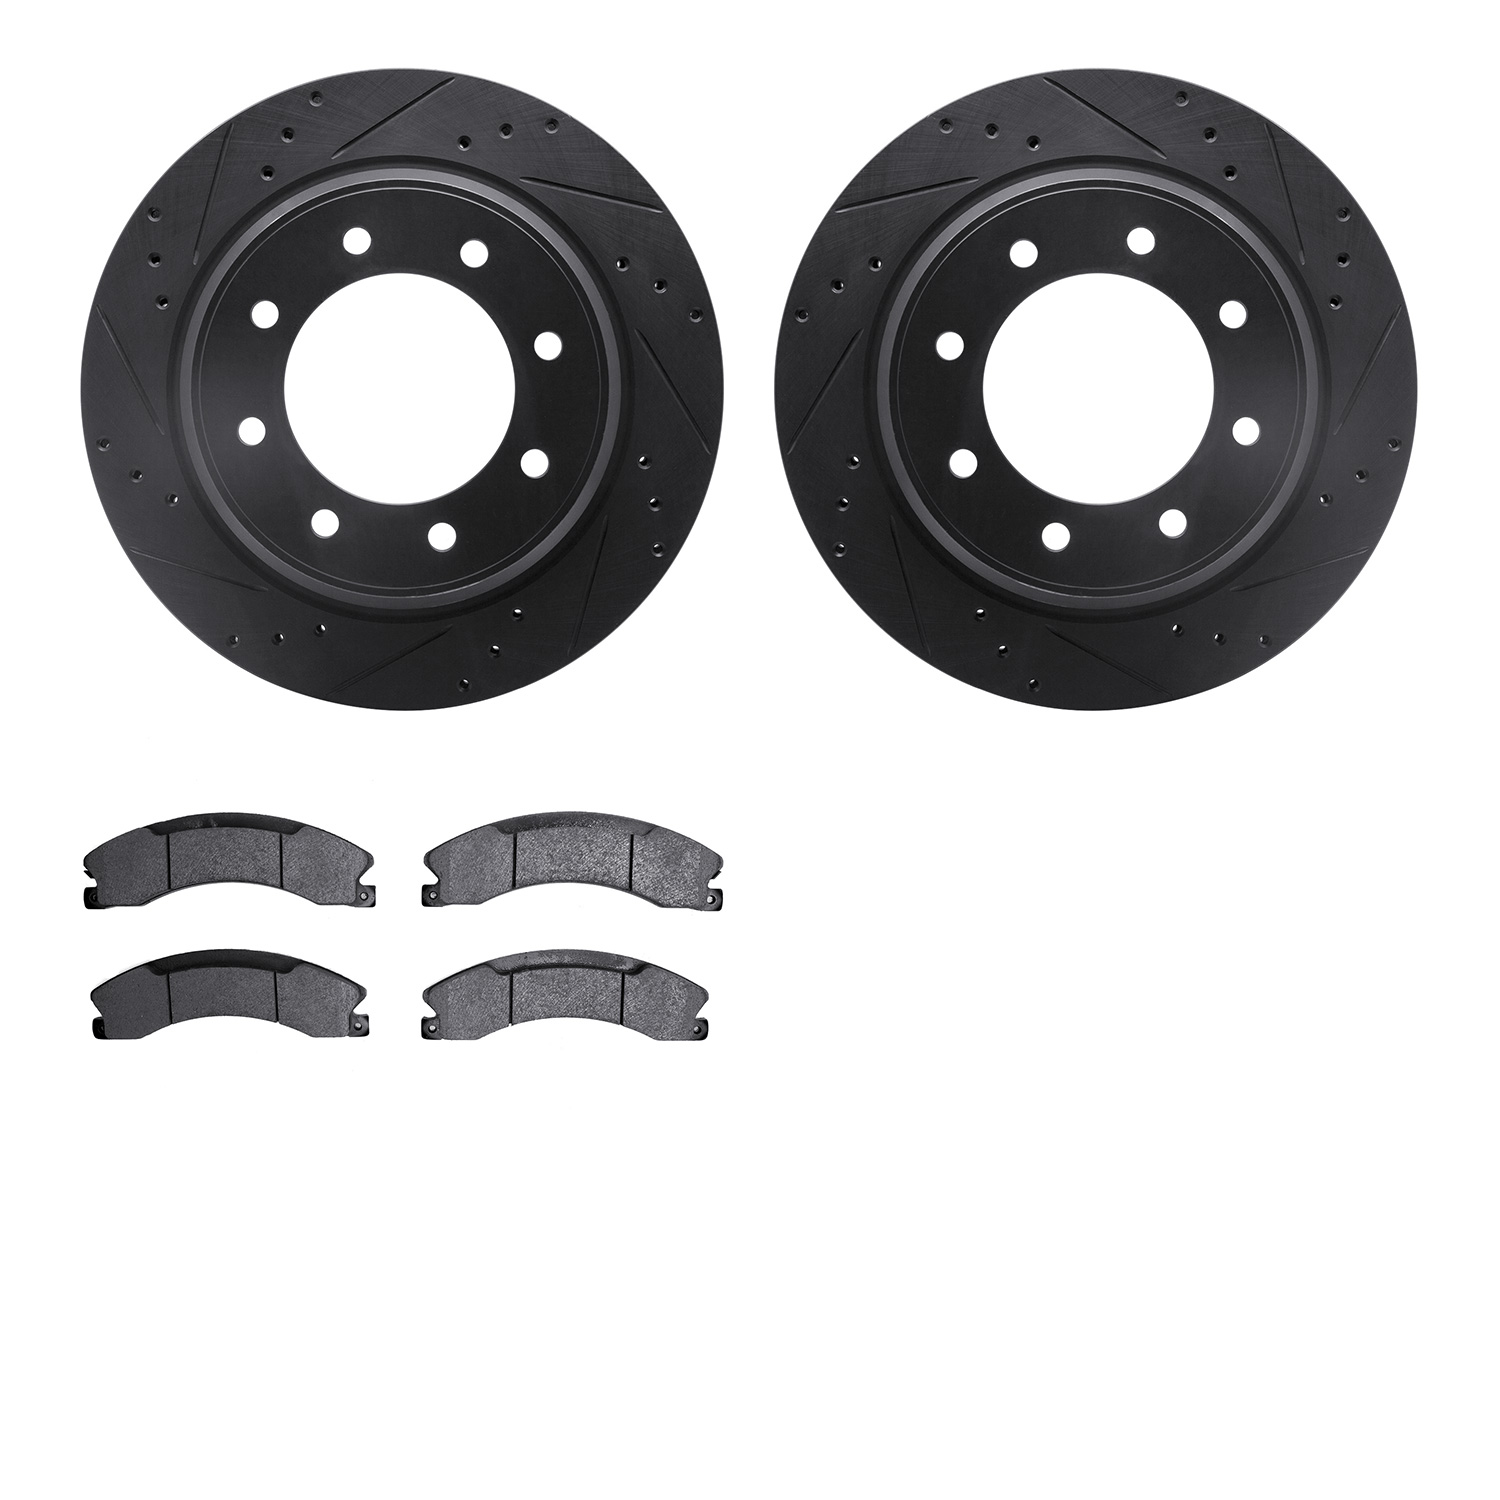 8402-67006 Drilled/Slotted Brake Rotors with Ultimate-Duty Brake Pads Kit [Black], 2012-2021 Infiniti/Nissan, Position: Rear